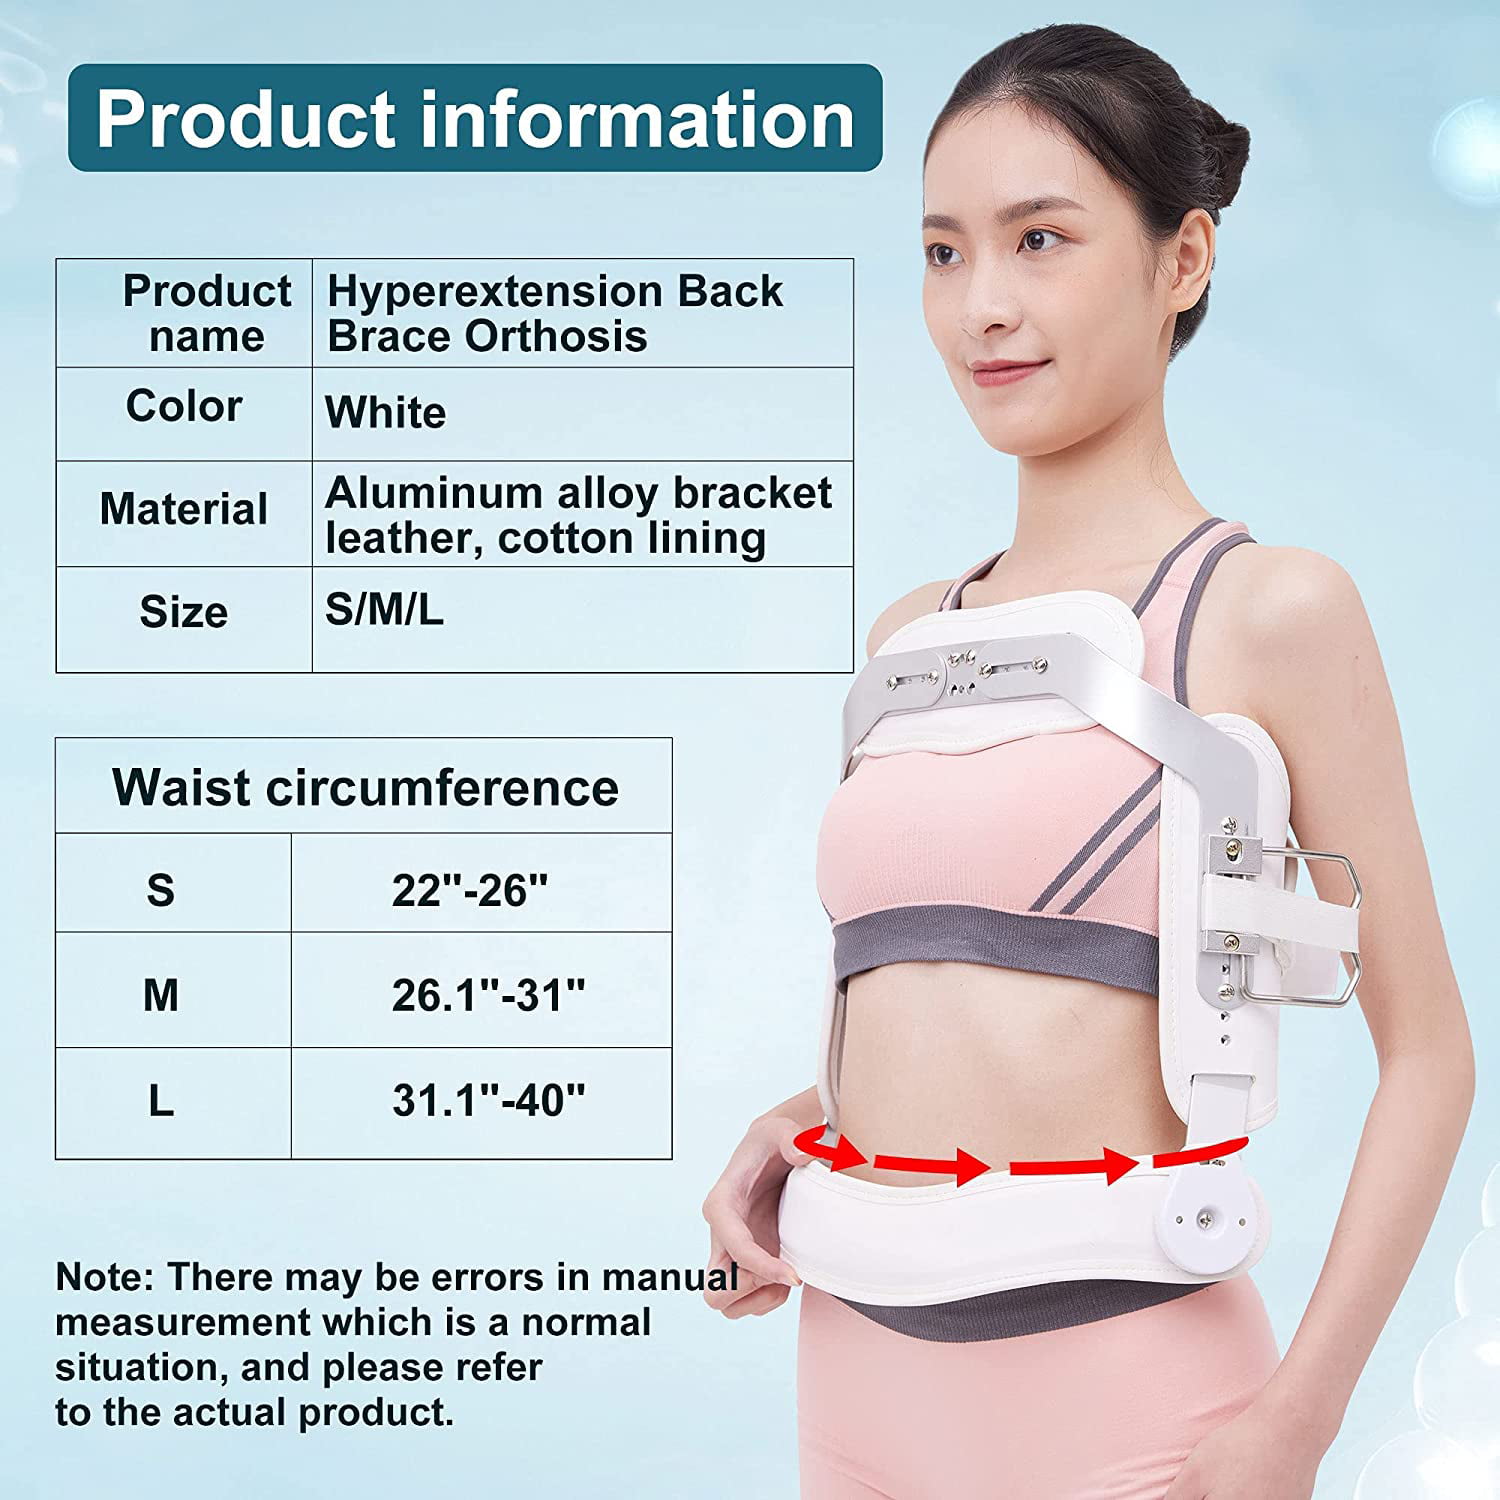 Hyperextension Back Brace Orthotics Jewett Brace for Thoracic & Lumbar  Spine Flexion, Spine Compression Fractures(Small) 